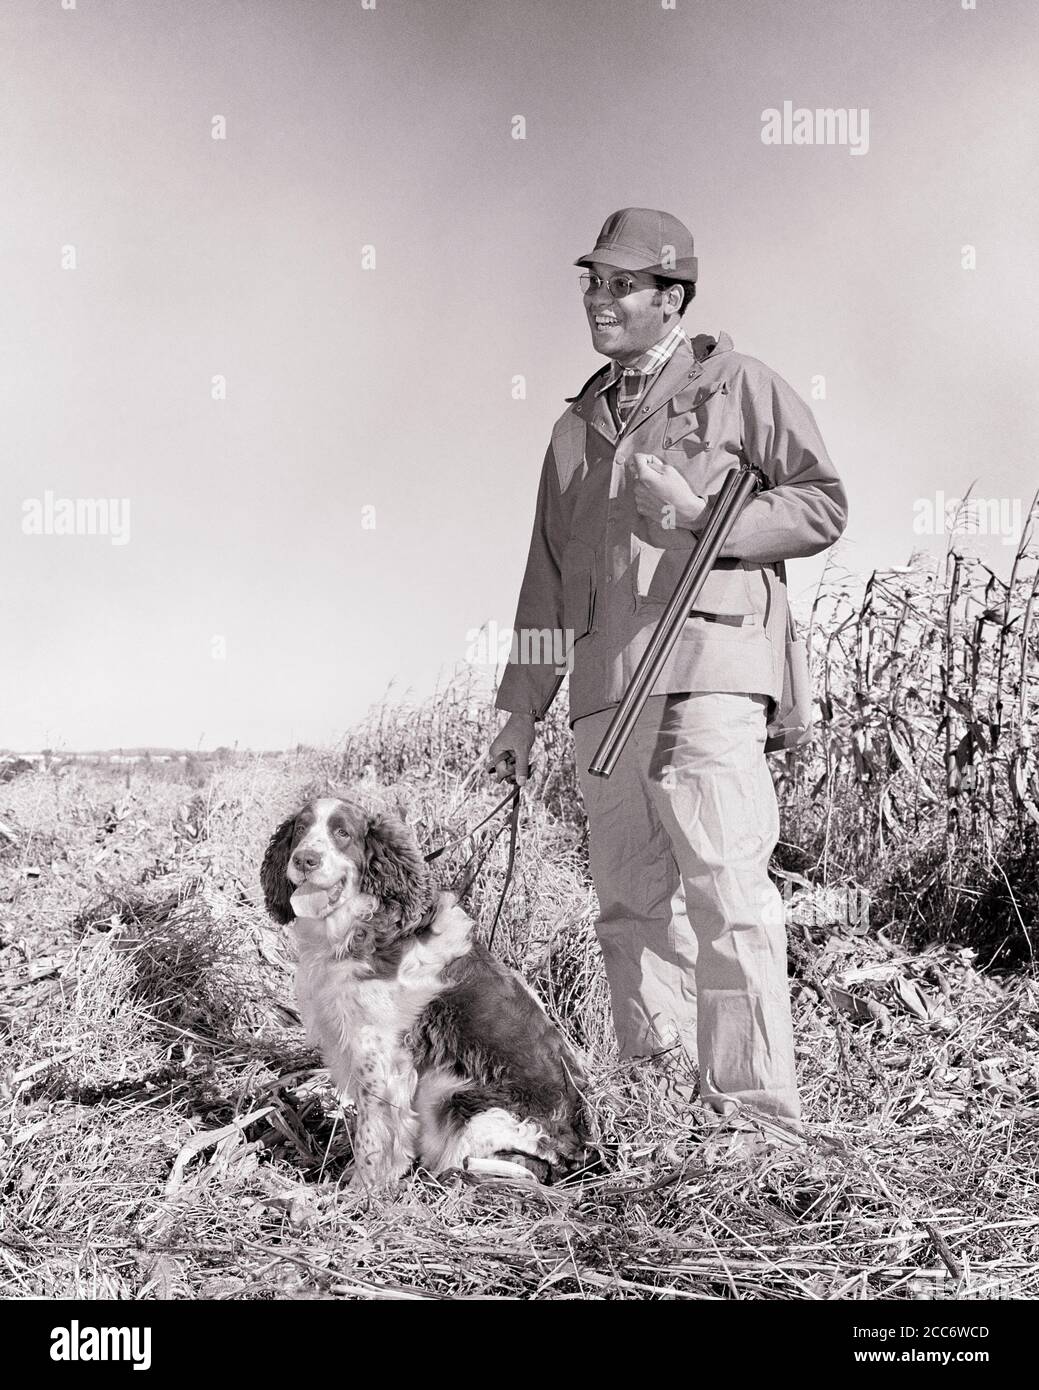 1970s SMILING AFRICAN-AMERICAN MAN UPLAND GAME HUNTER STANDING BESIDE CORNFIELD POSED WITH SHOTGUN AND SPRINGER SPANIEL DOG  - g7641 HAR001 HARS JOY LIFESTYLE SATISFACTION RURAL NATURE COPY SPACE FRIENDSHIP FULL-LENGTH PERSONS MALES HUNTER B&W HUNT ACTIVITY HAPPINESS PHYSICAL MAMMALS ADVENTURE STRENGTH AFRICAN-AMERICANS AFRICAN-AMERICAN AND CANINES RECREATION BLACK ETHNICITY FALL SEASON SPRINGER POOCH CONCEPTUAL BESIDE FLEXIBILITY MUSCLES STYLISH UPLAND CANINE CORNFIELD FIREARM FIREARMS HUNTERS MAMMAL MID-ADULT MAN POSED RELAXATION TOGETHERNESS YOUNG ADULT WOMAN AUTUMNAL BLACK AND WHITE Stock Photo